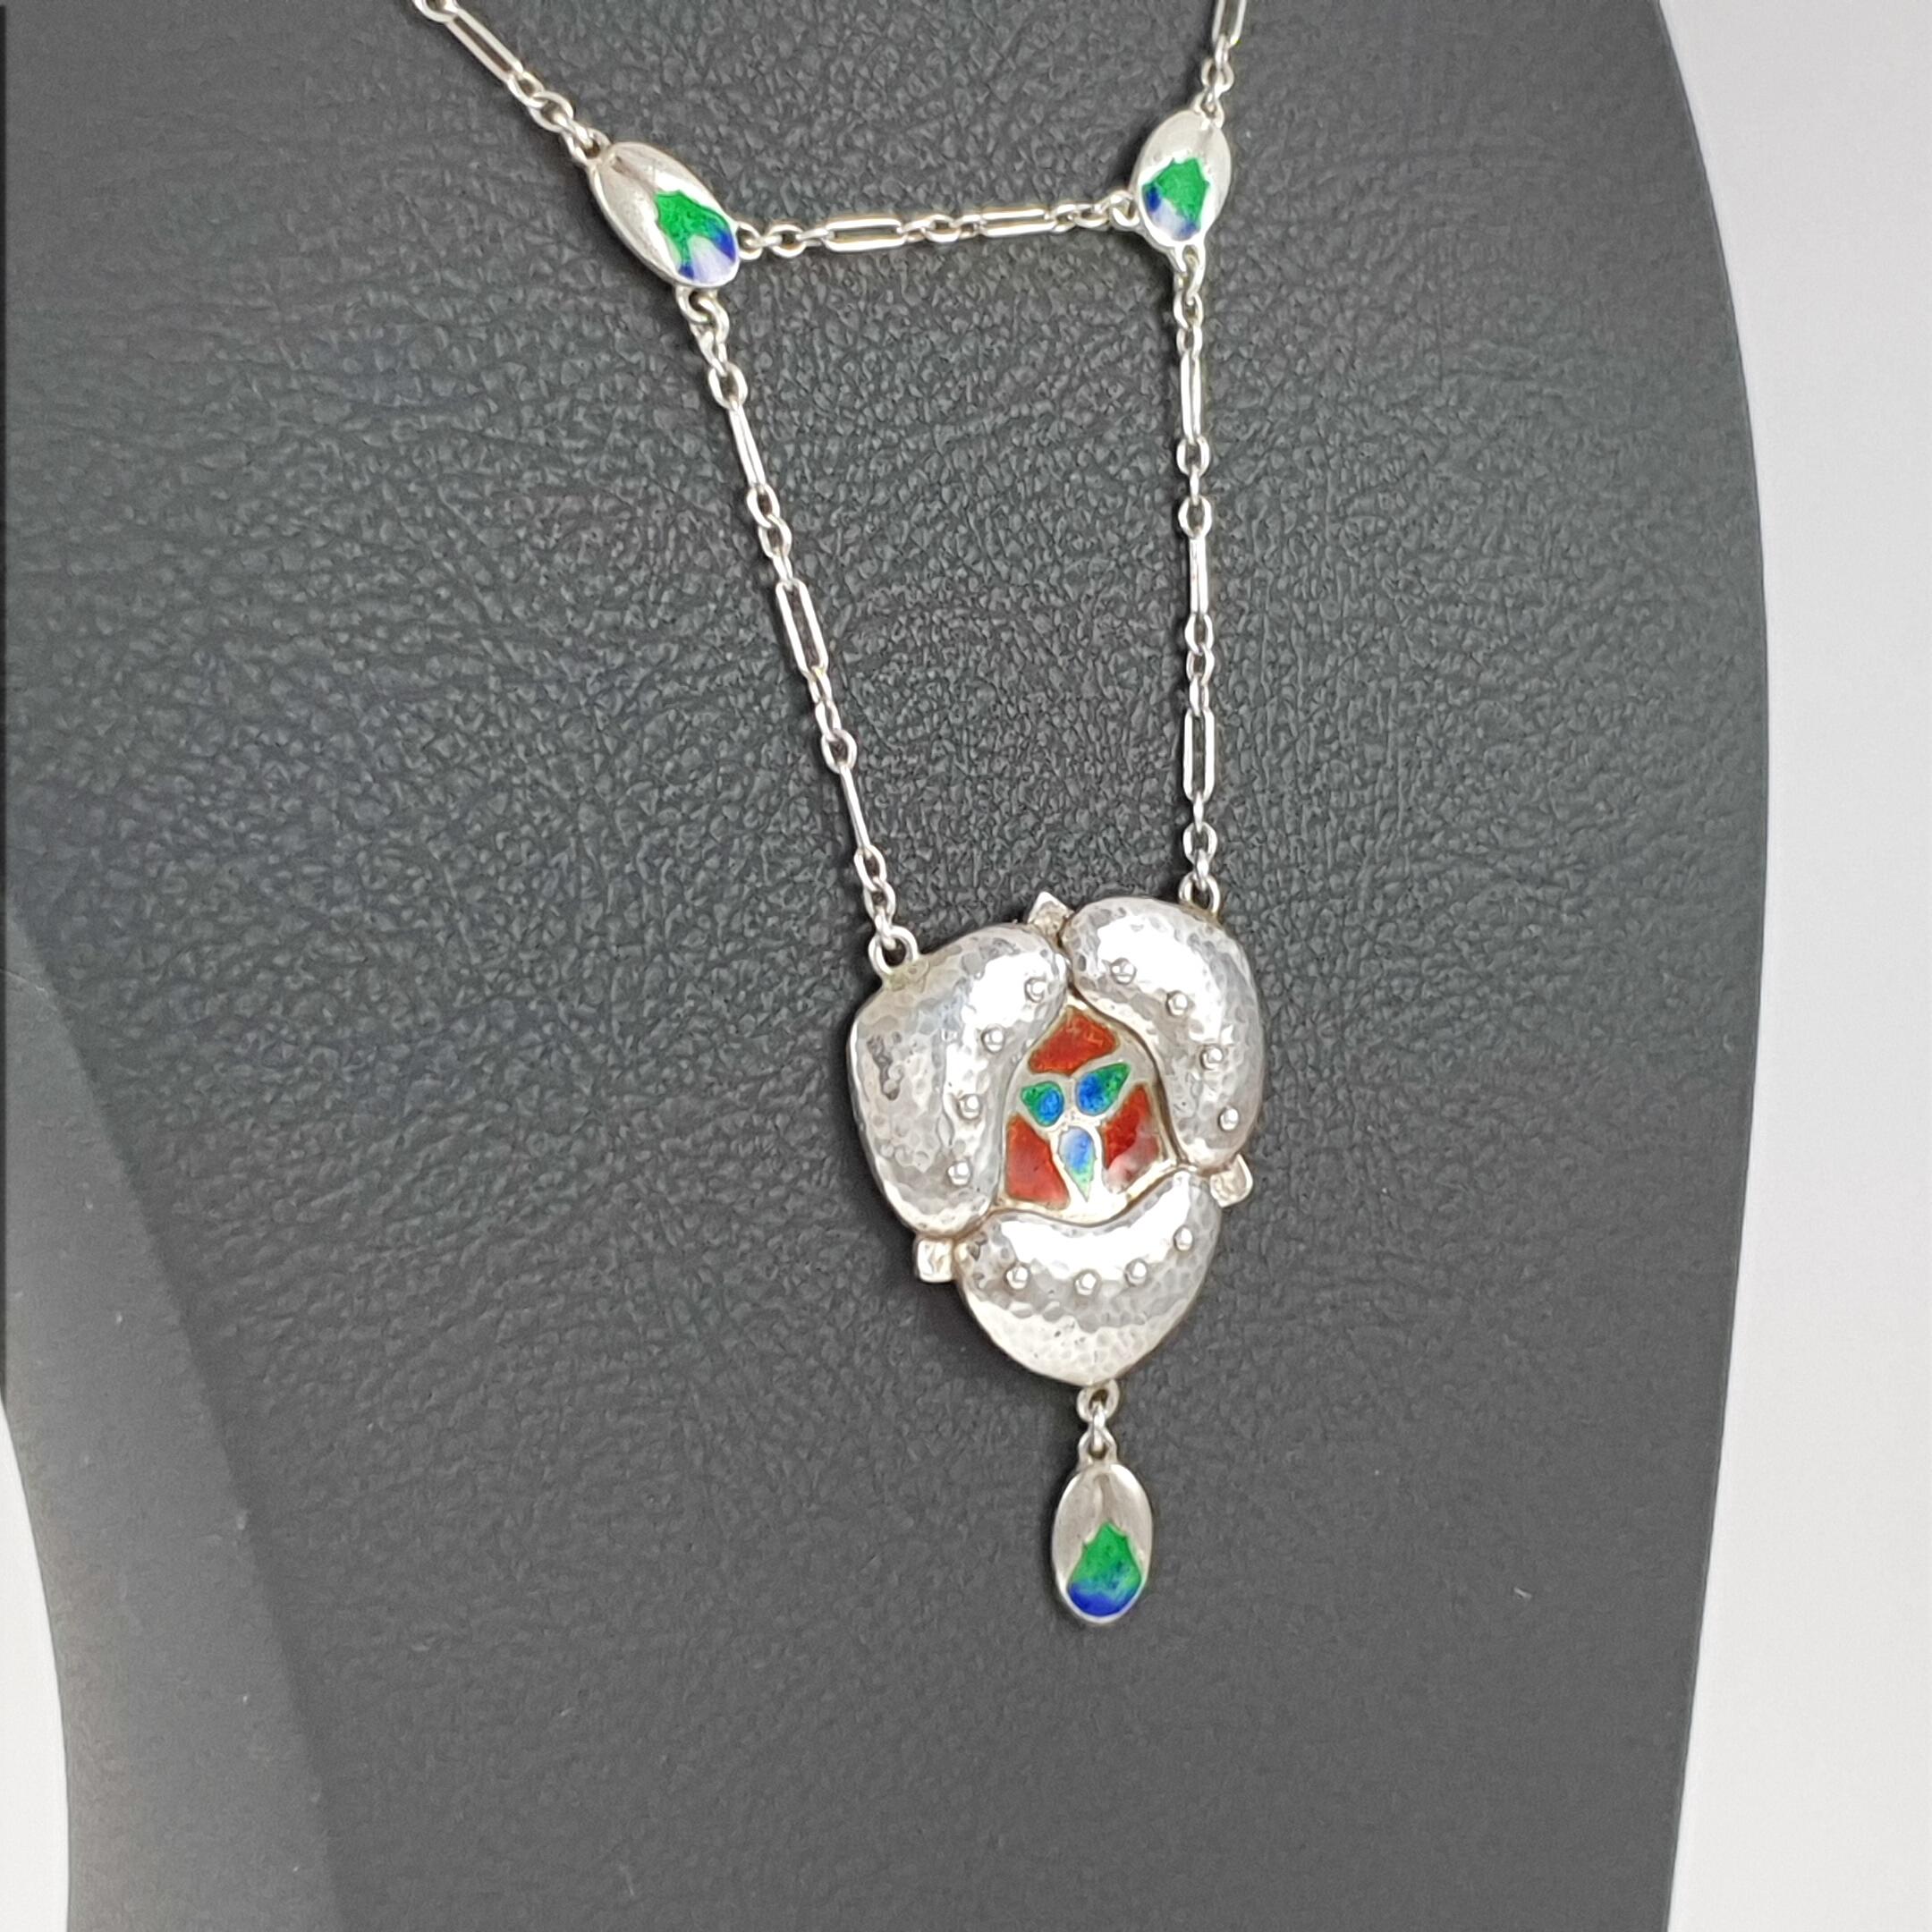 Murrle Bennett & Co. Arts & Crafts Silver and Enamel Pendant Necklace circa 1905 5